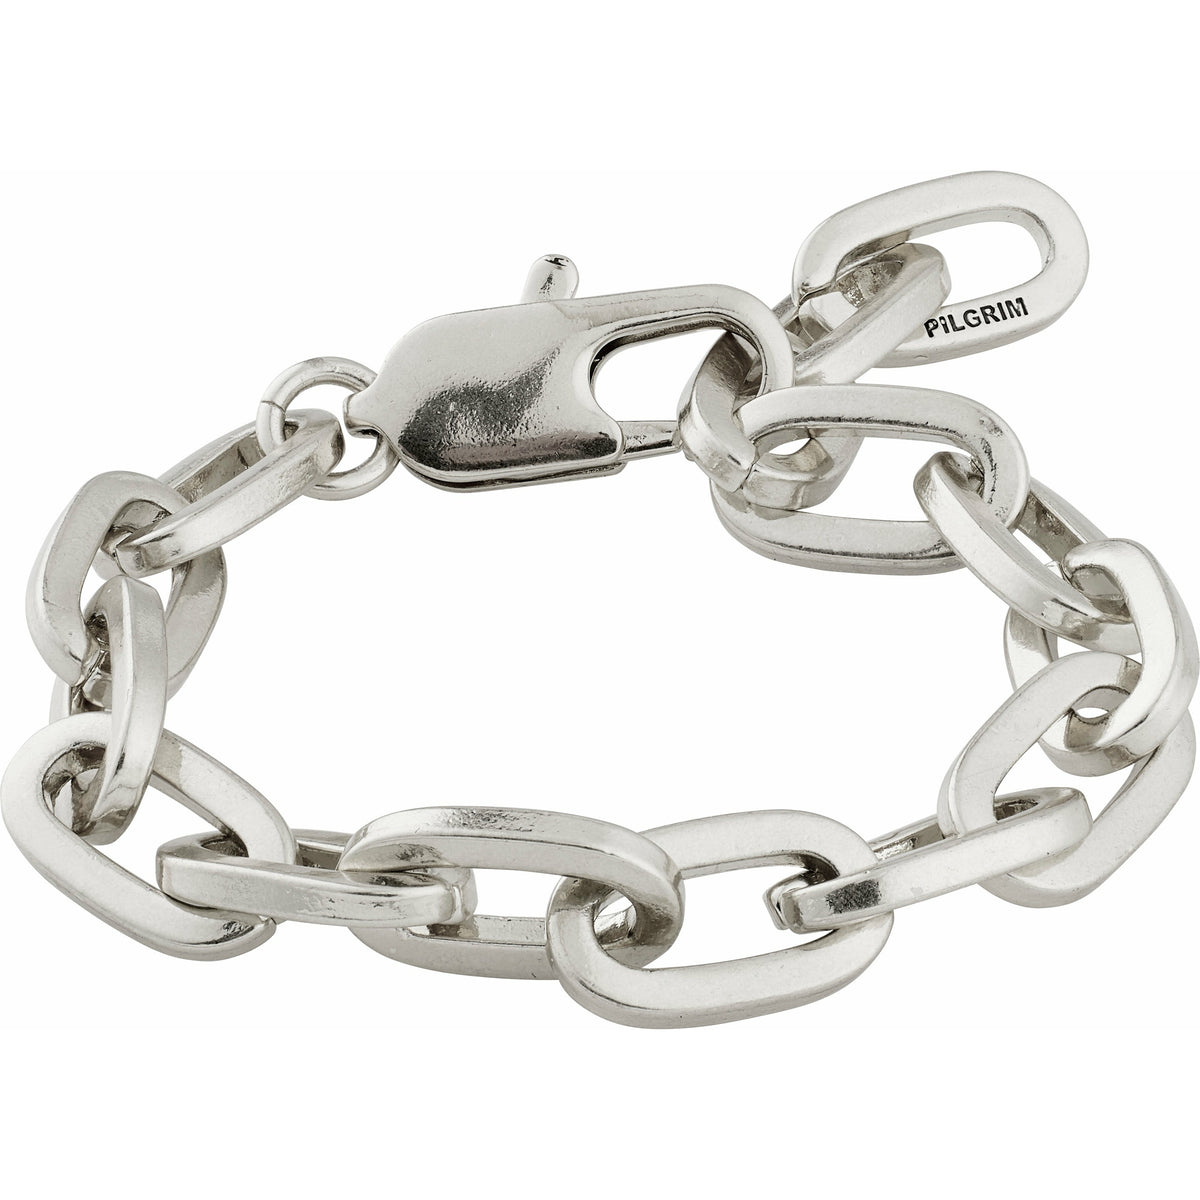 A chunky link bracelet with a statement clasp to tie it together for an edgy, raw look.  This bracelet is from our Tolerance collection. Tolerance to us, is the openness to discover common ground and learning from one another and creating strong bonds.  Handmade with heart.  Danish design.  Gold or silver plated.  Chain link measures 20 cm    